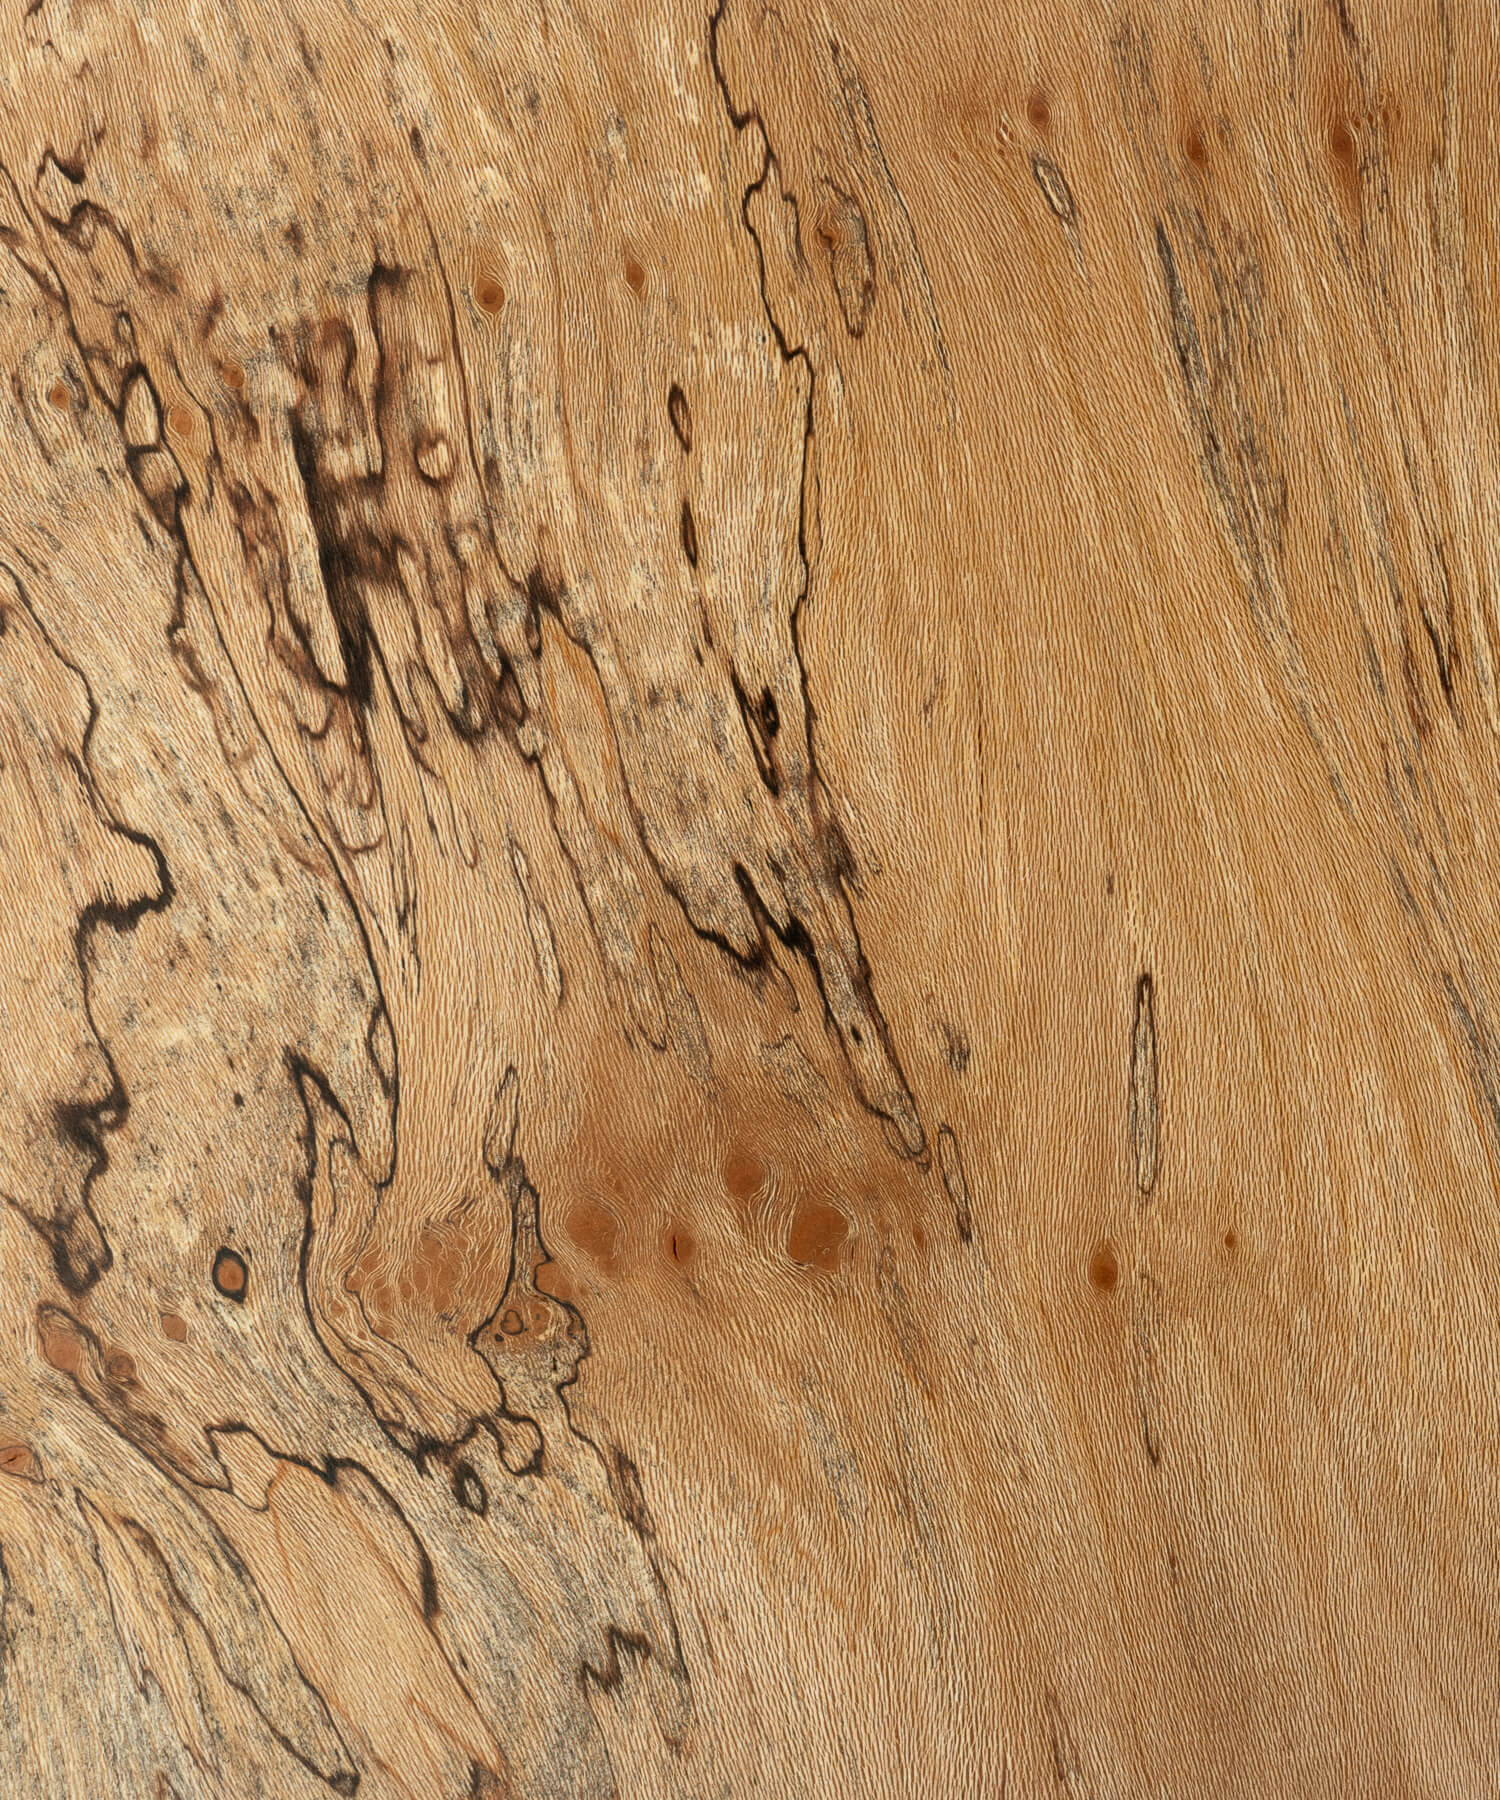 Spalted London plane timber oiled close up